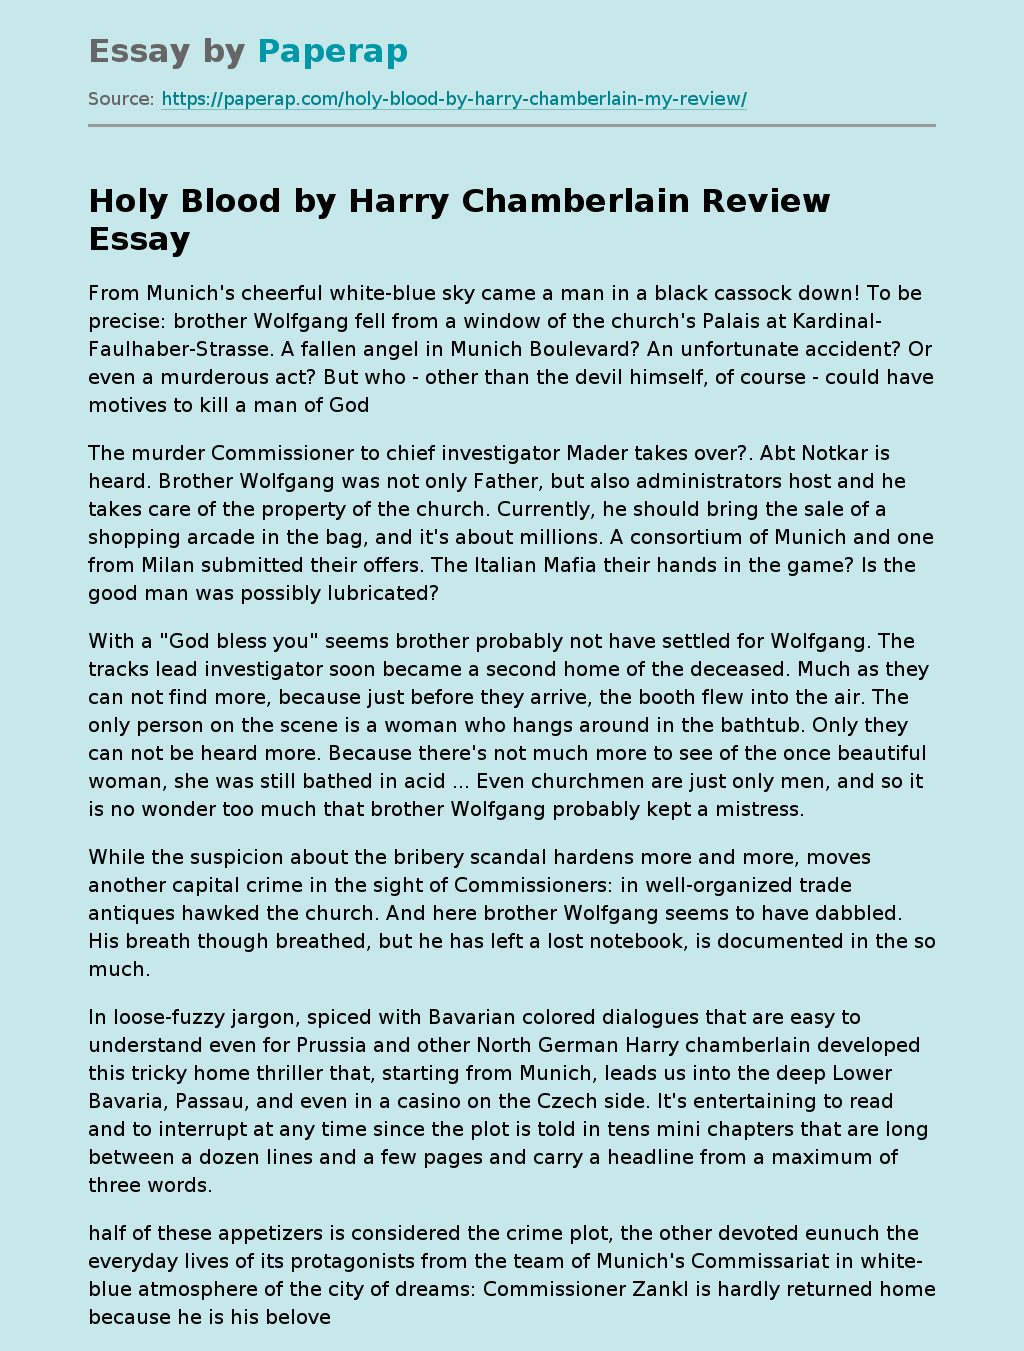 Holy Blood by Harry Chamberlain Review